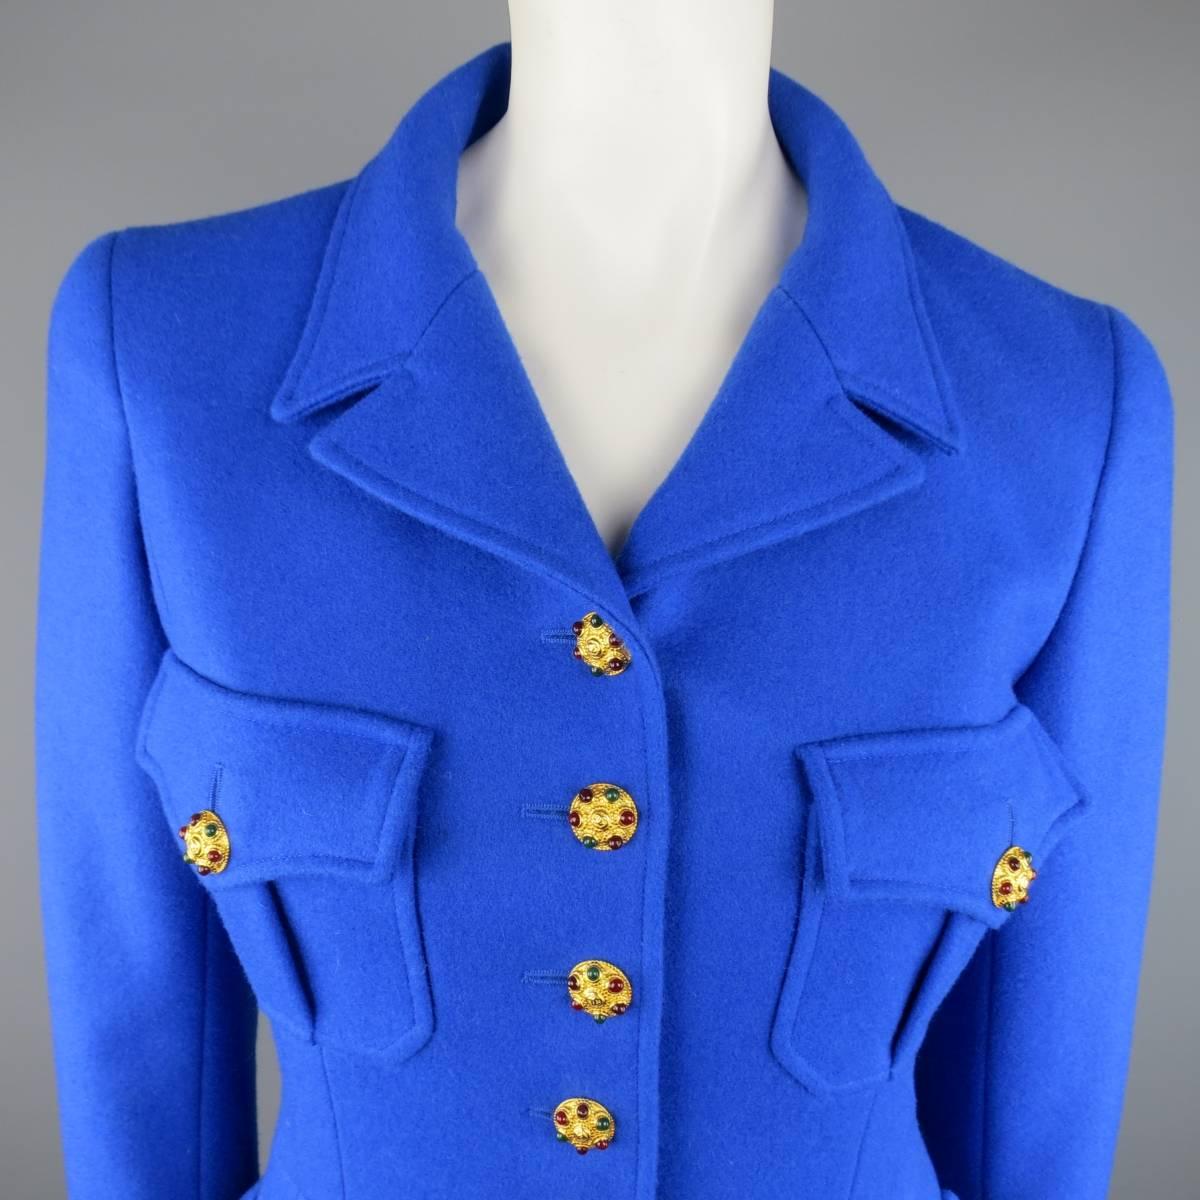 Rare and fabulous vintage CHANEL military jacket circa Fall/Winter 1996 Collection comes in a royal blue wool felt and features a tailored silhouette, pointed lapel, symmetrical patch flap pockets, six button closure with gorgeous yellow gold tone